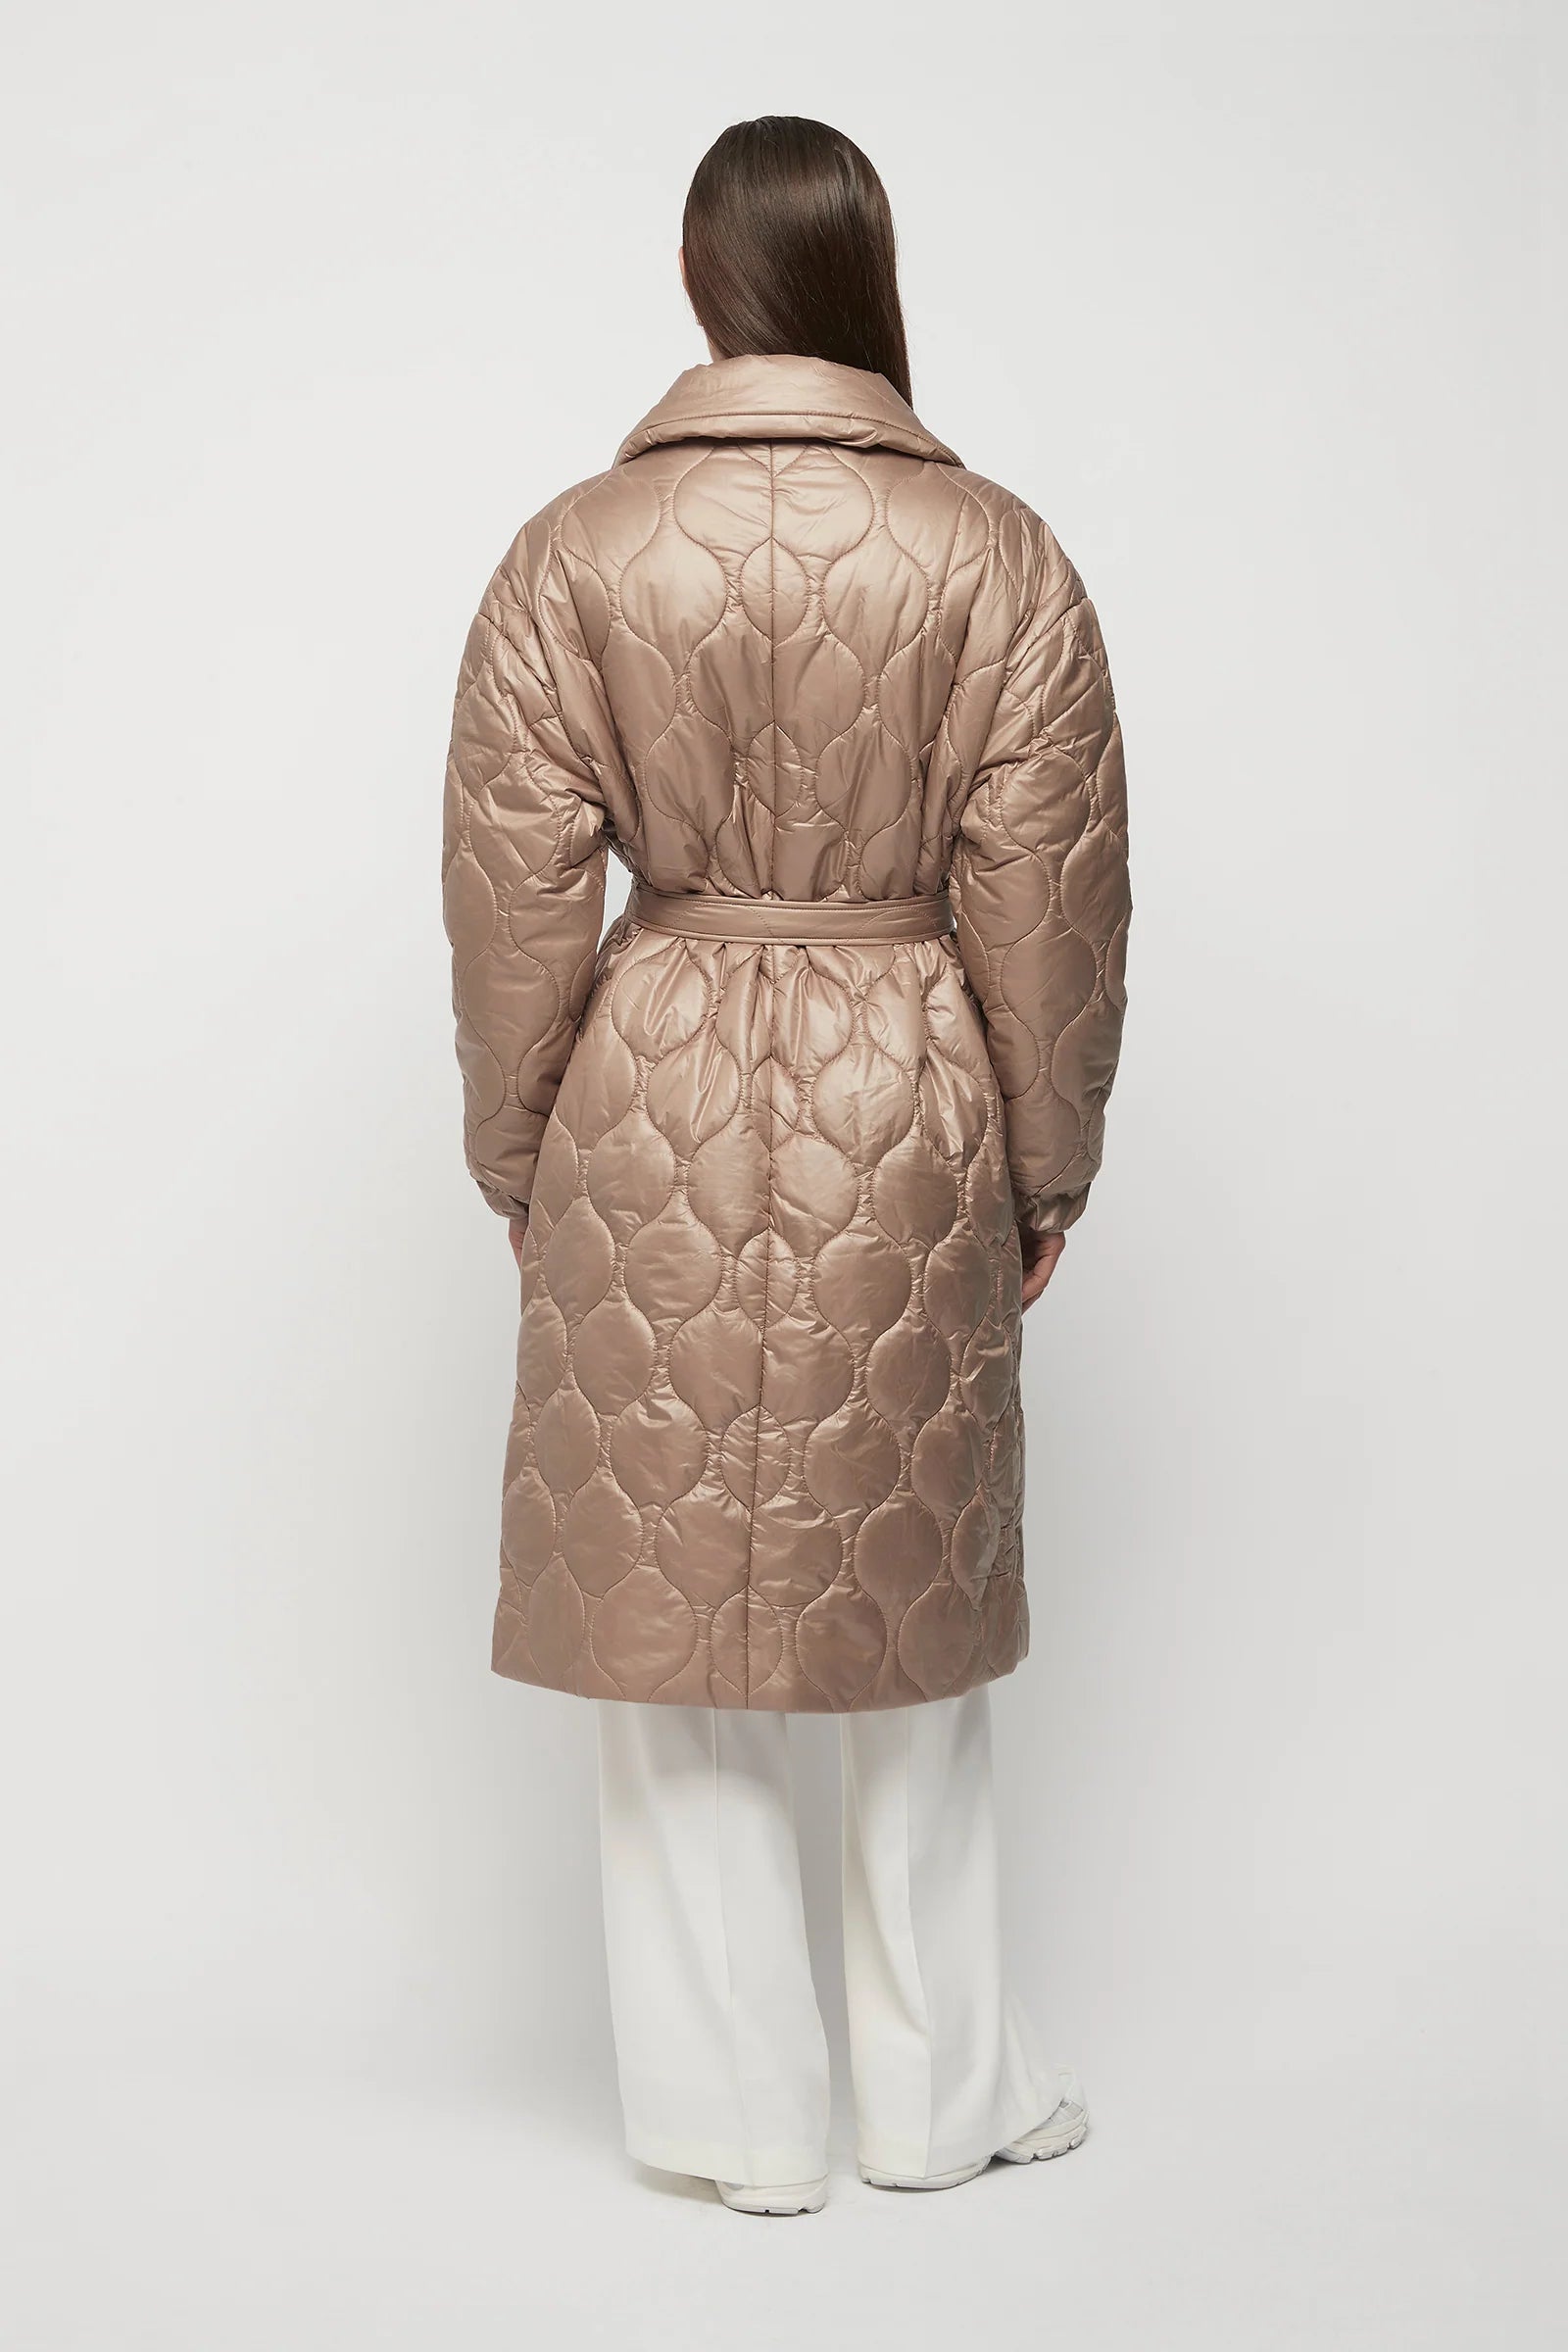 Friend of Audrey Maxwell Quilted Bomber